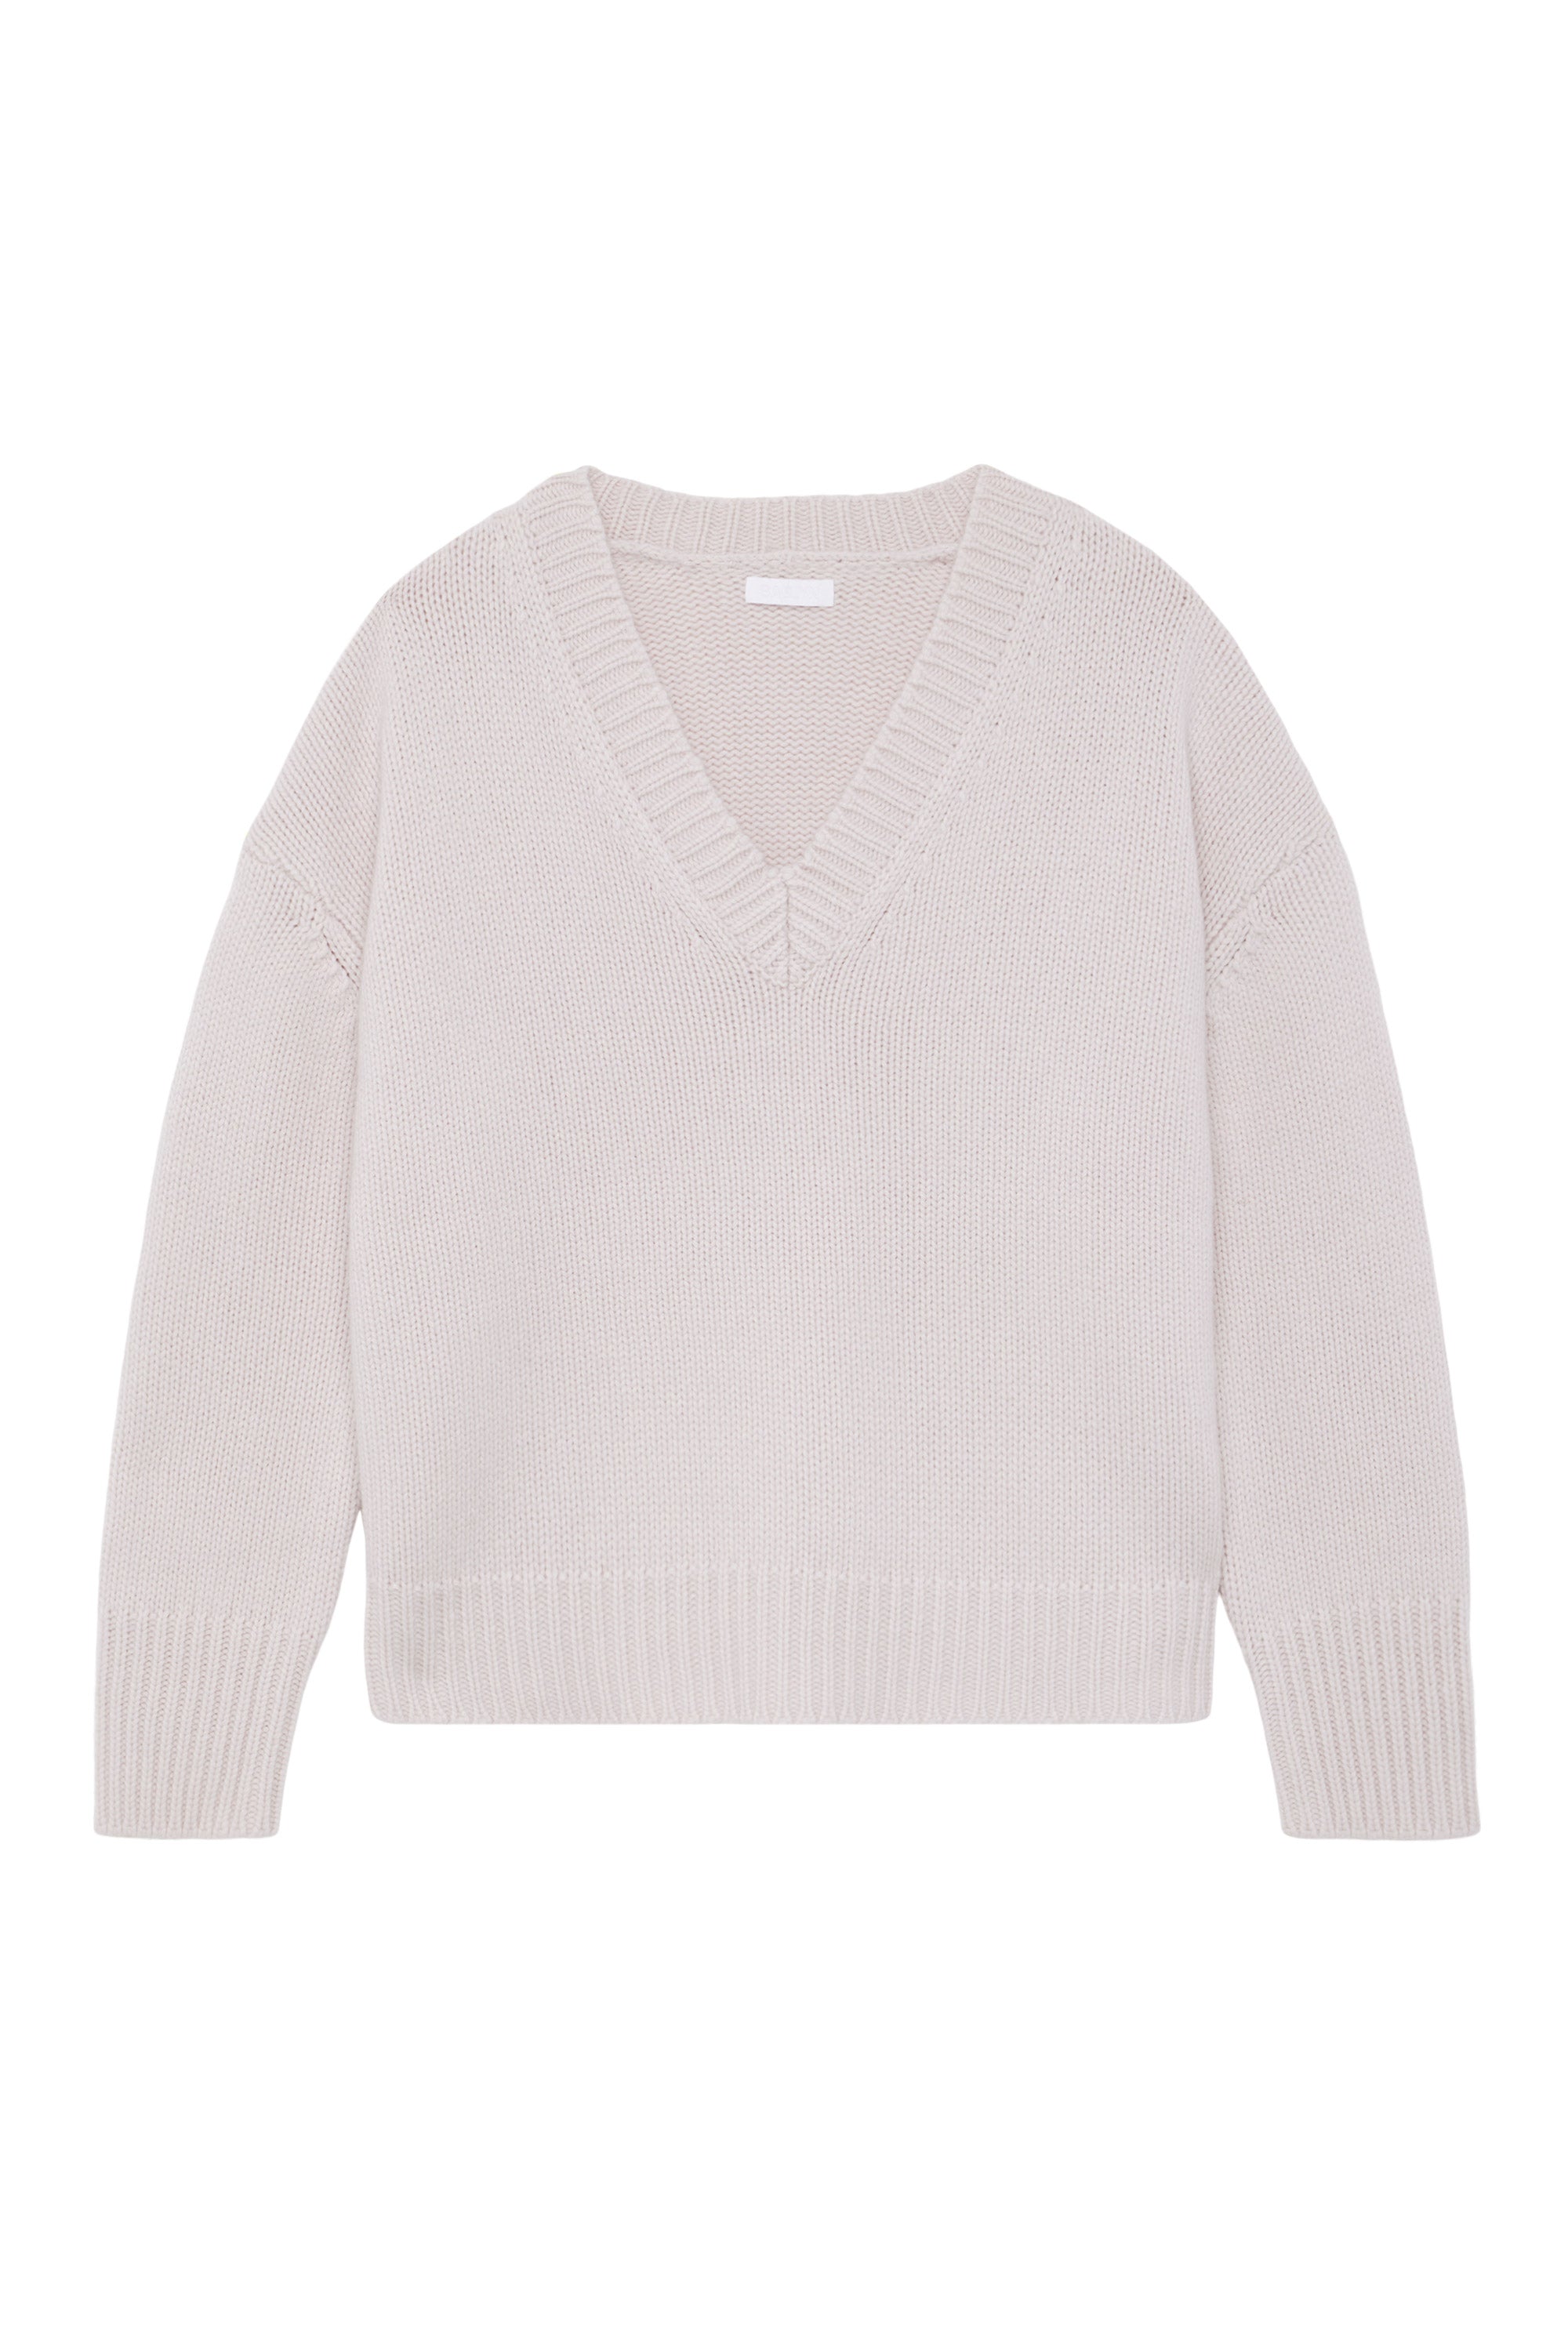 CASHMERE COLLECTION – SABLYN